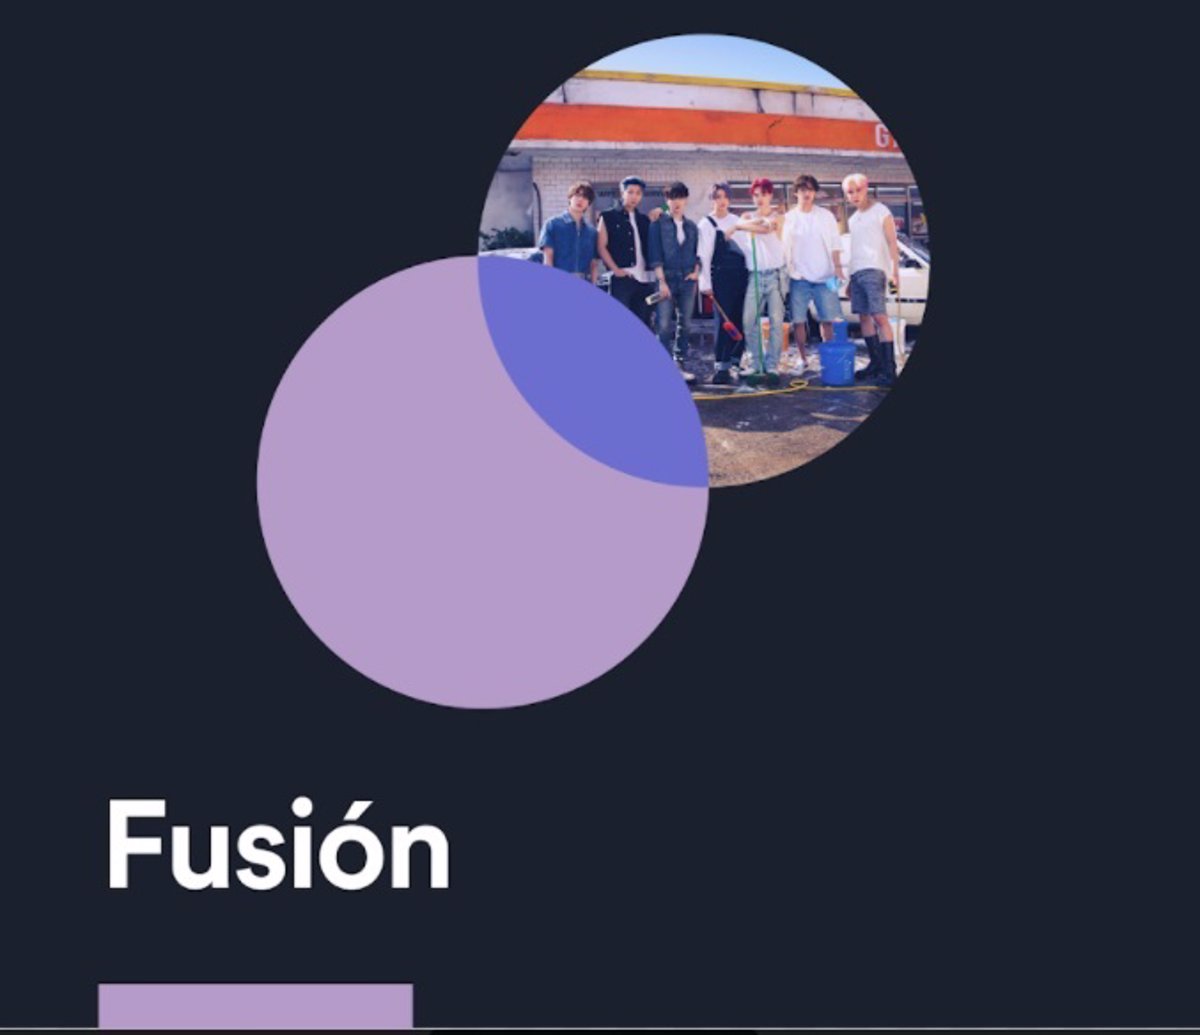 Spotify allows you to merge music with your group of friends or with artists